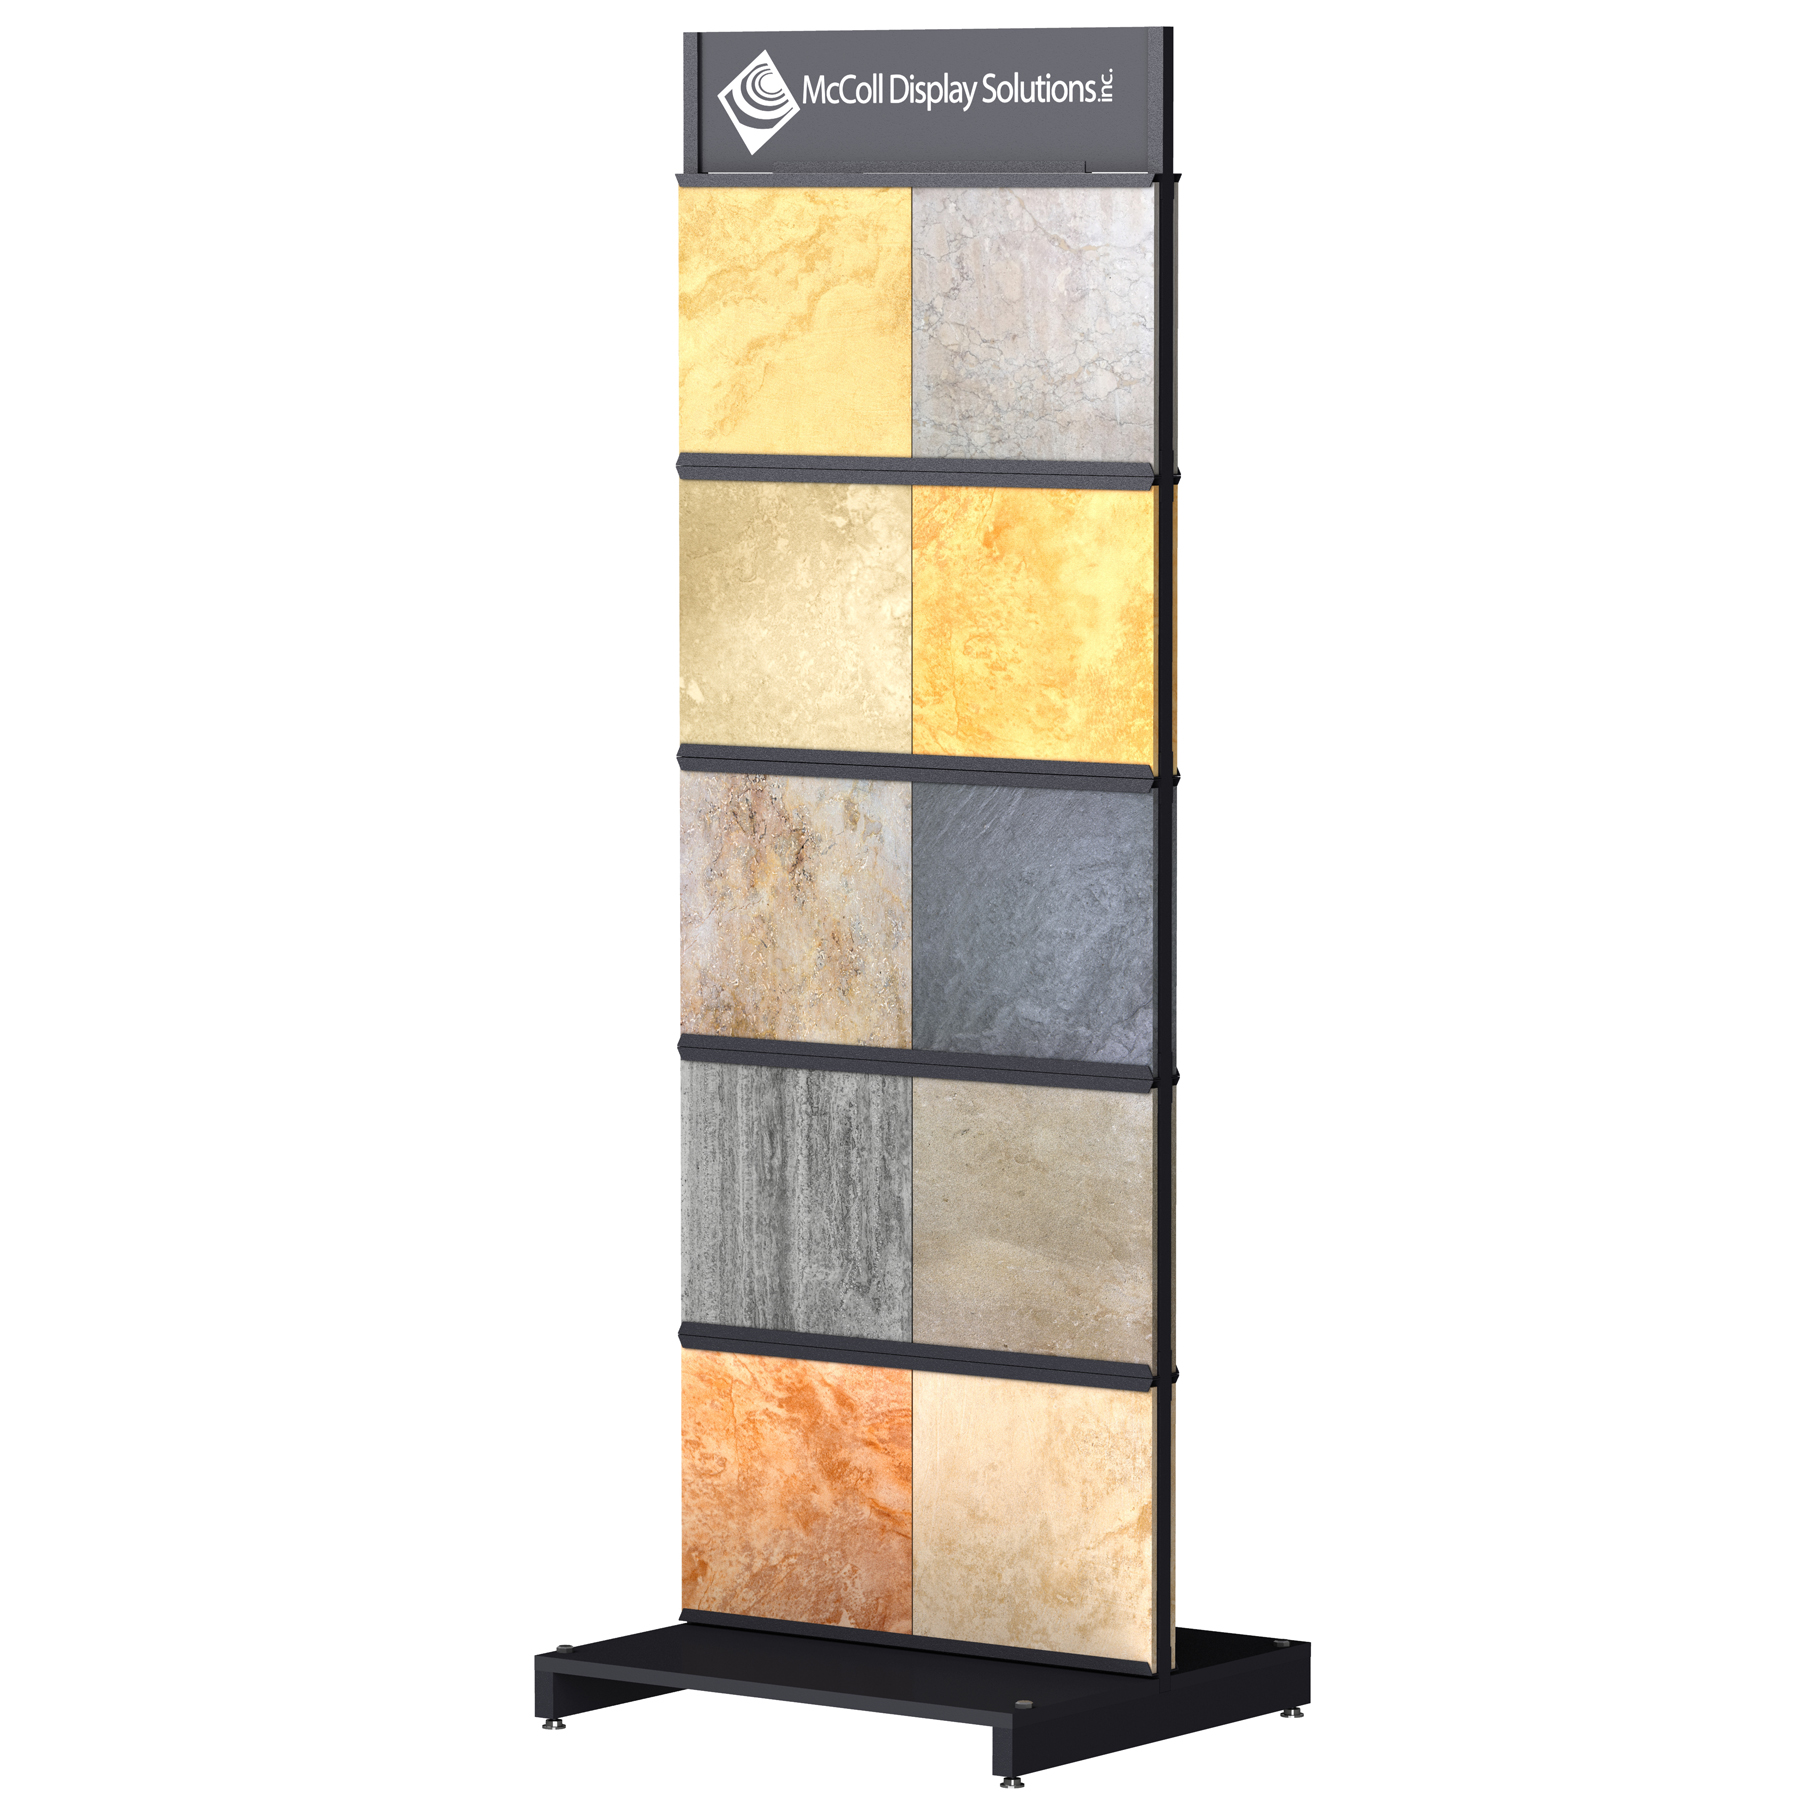 CD67 Standing Rack Channel System Tower Ceramic Tile Stone Marble Quartz Synthetic Countertop Showroom Displays McColl Display